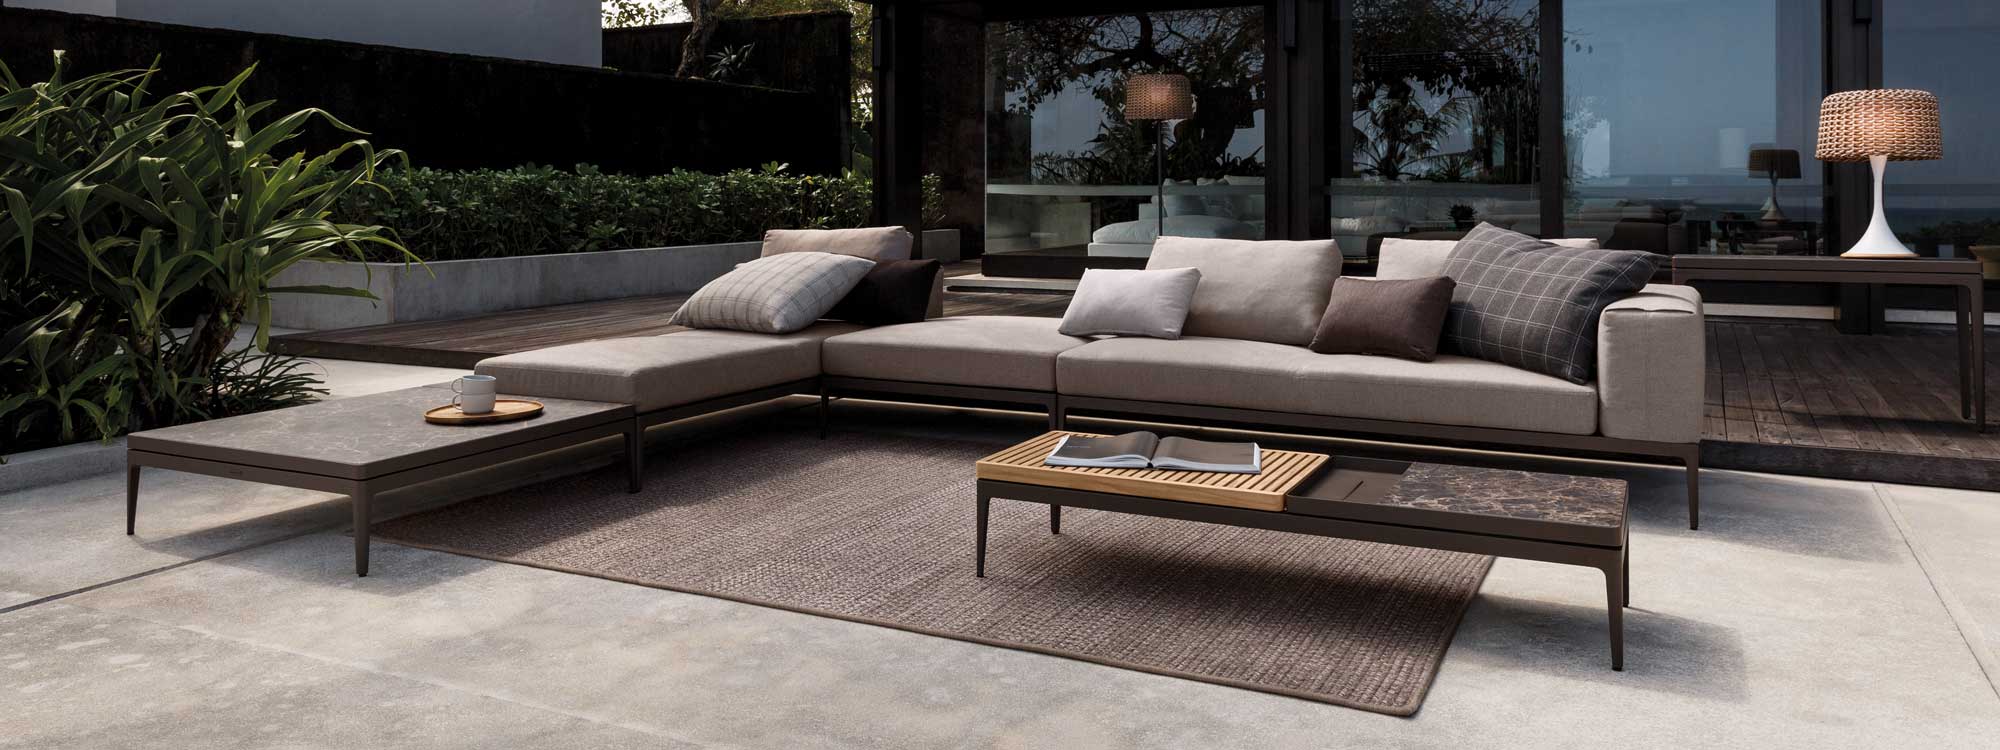 Image of Grid large modern garden sofa with grey frame and cushions, and table surfaces in teak and ceramic by Gloster